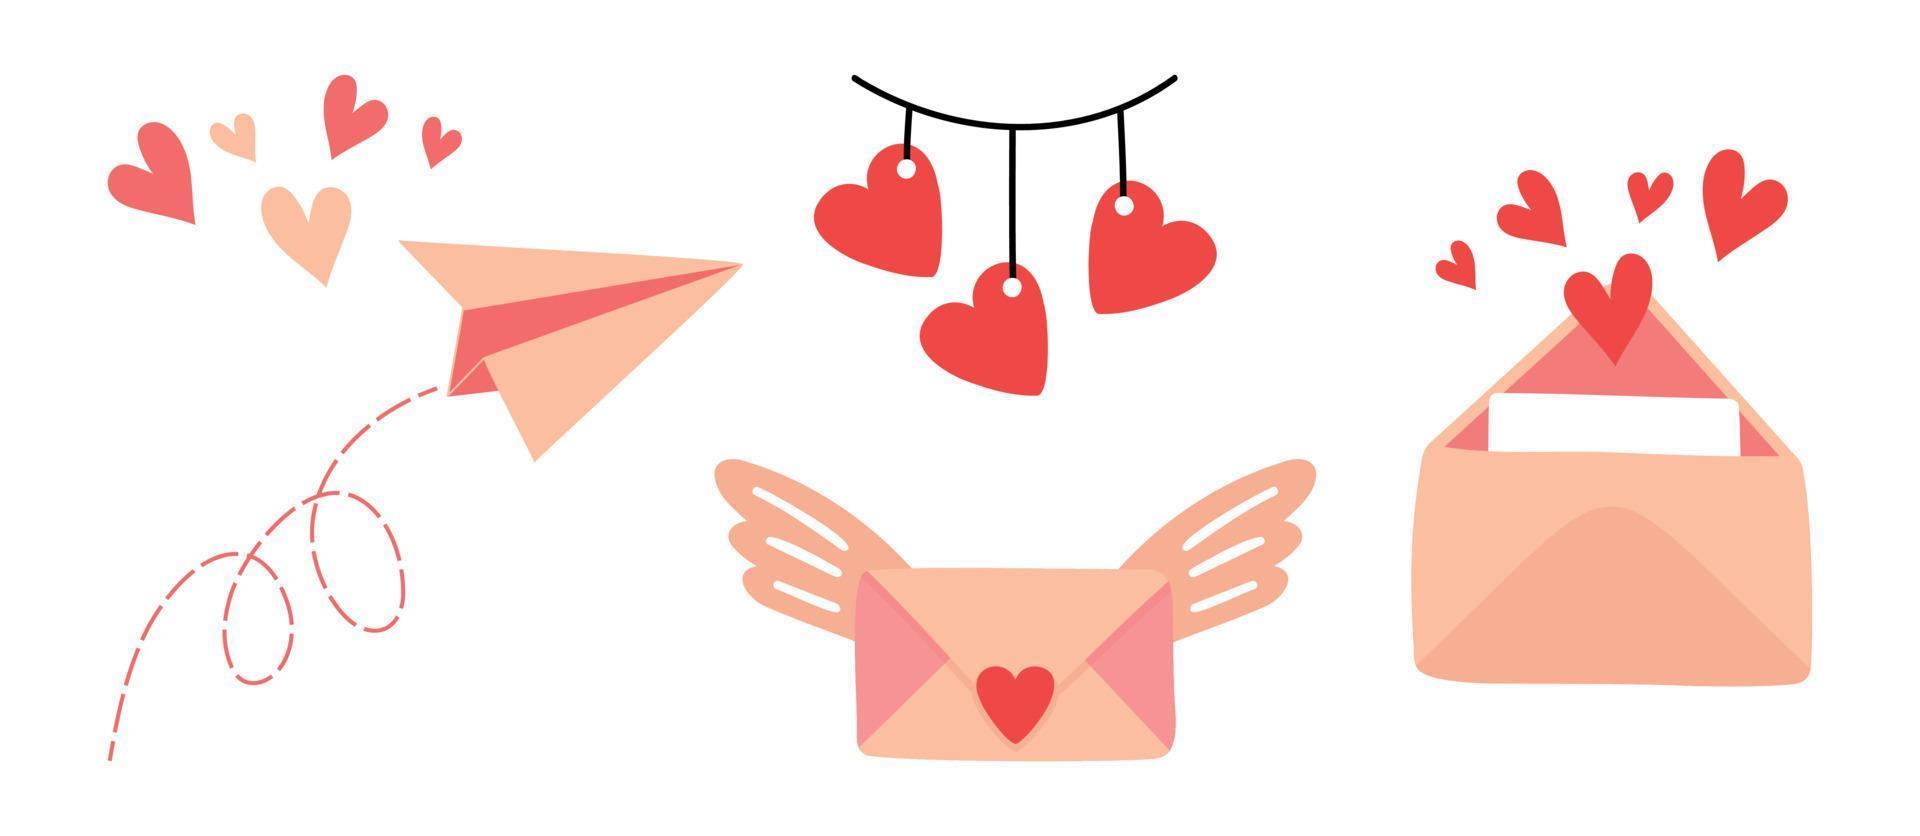 Set of vector illustrations of love messages for Valentine's Day. Flying paper airplane, cute letter with wings, envelope with hearts open. Valentine's Day gift and element for logo, game, print, post